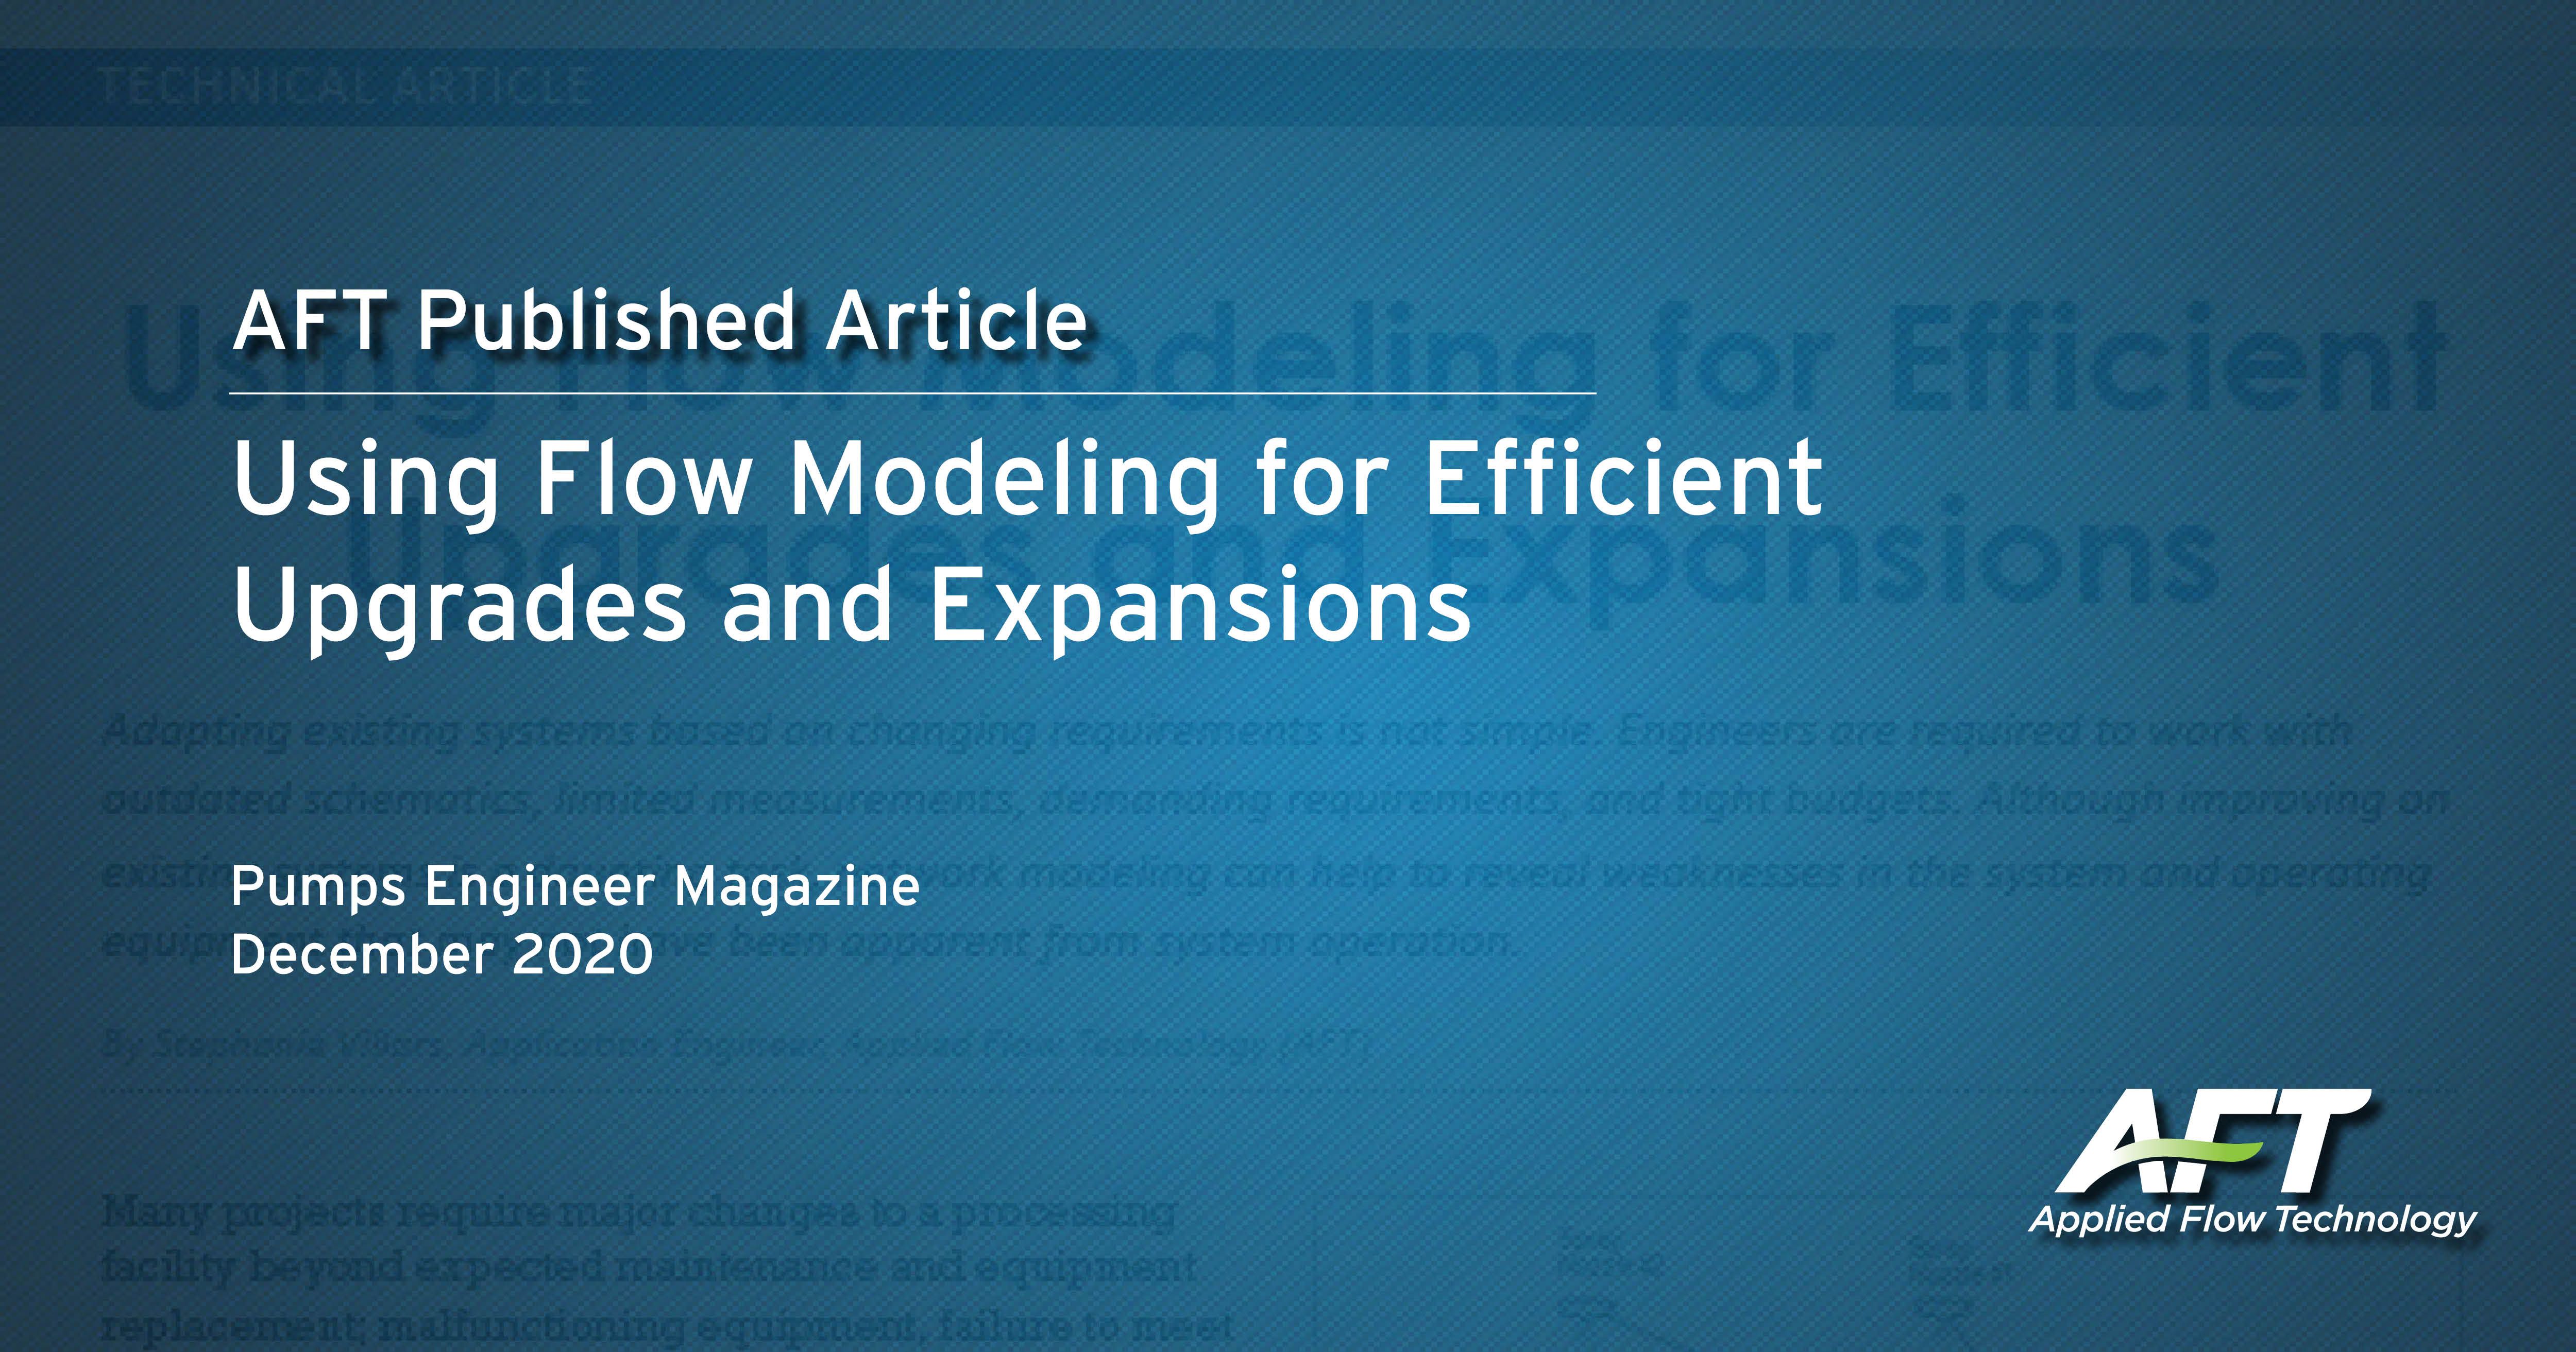 Using Flow Modeling for Efficient Upgrades and Expansions